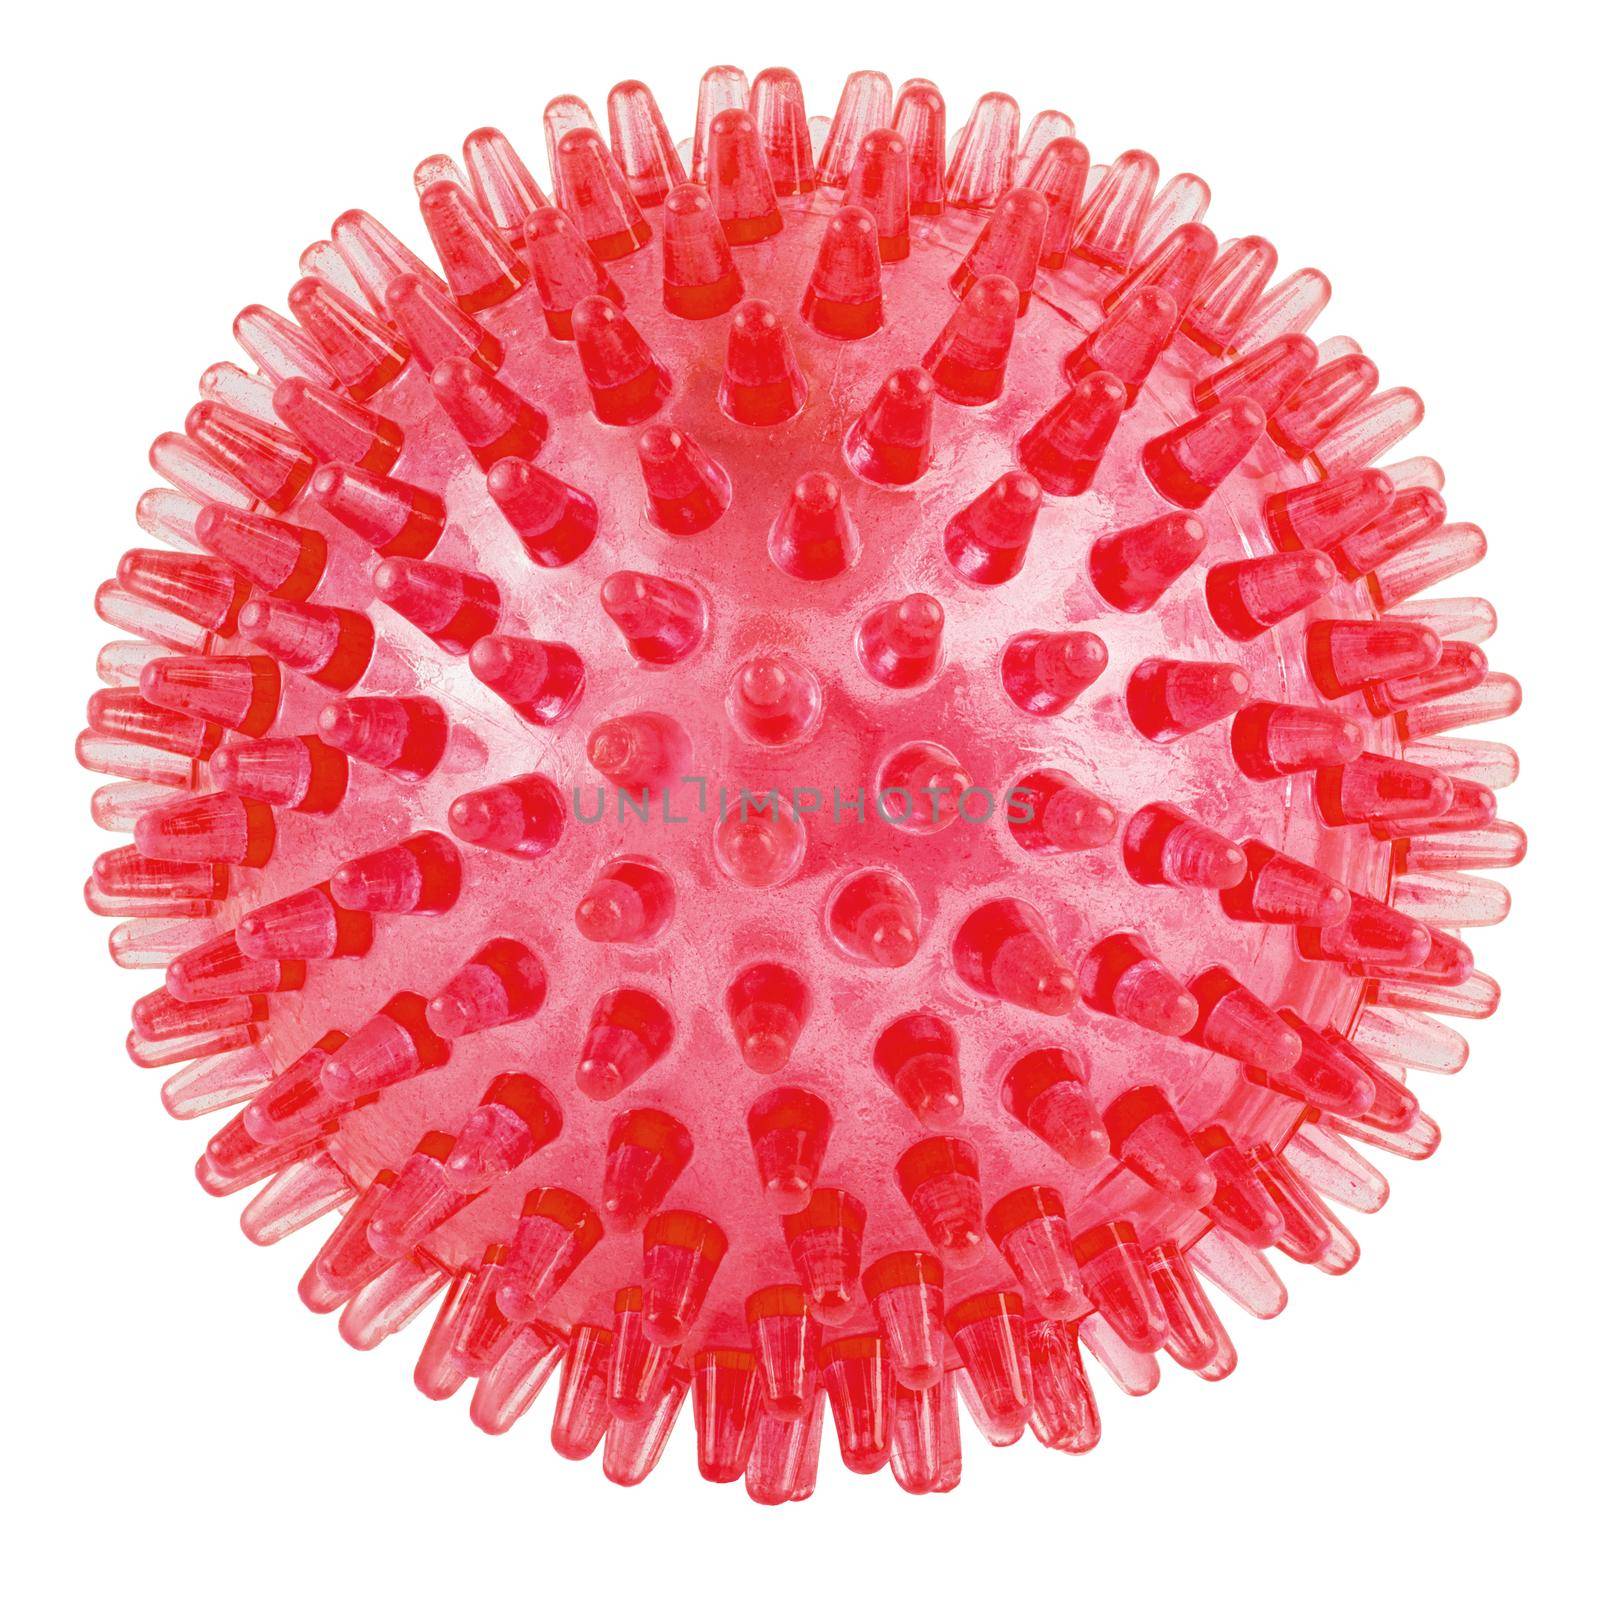 transparent red spiked plastic ball isolated on white background - massager, dog toy and COVID-19 symbol by z1b